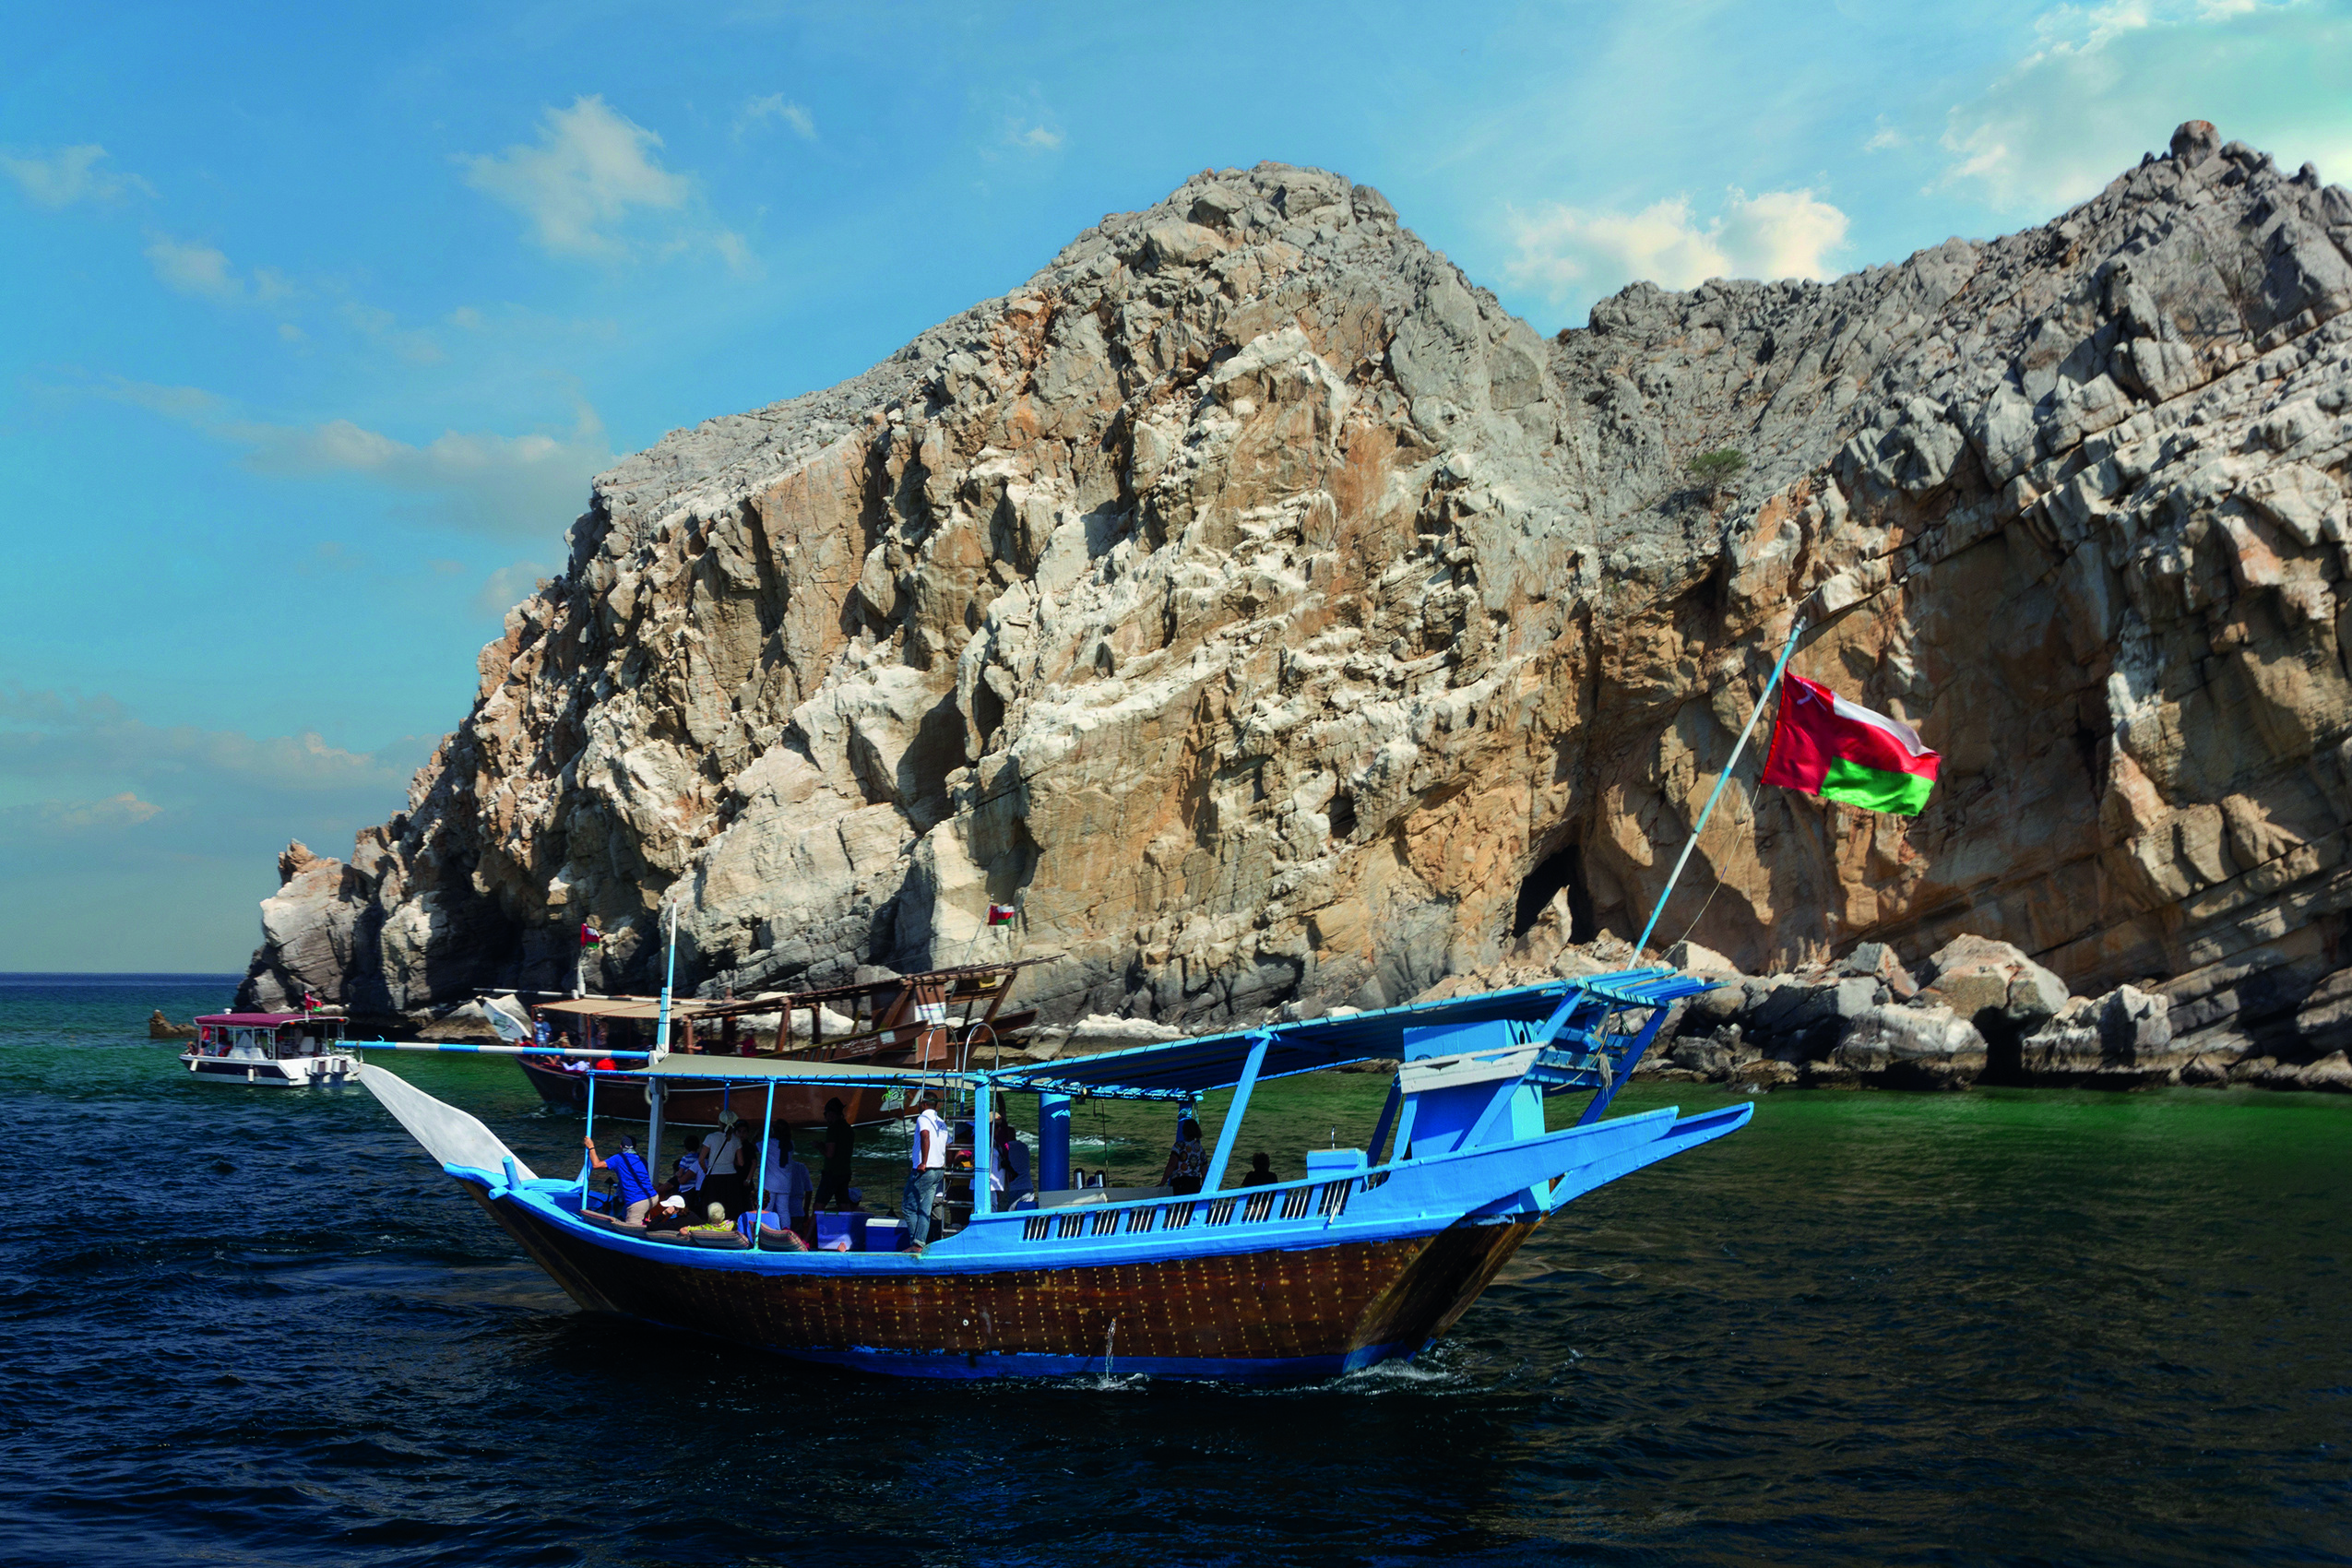 Sailing tourist dhow boat in Oman mountain fjords, Khasab.